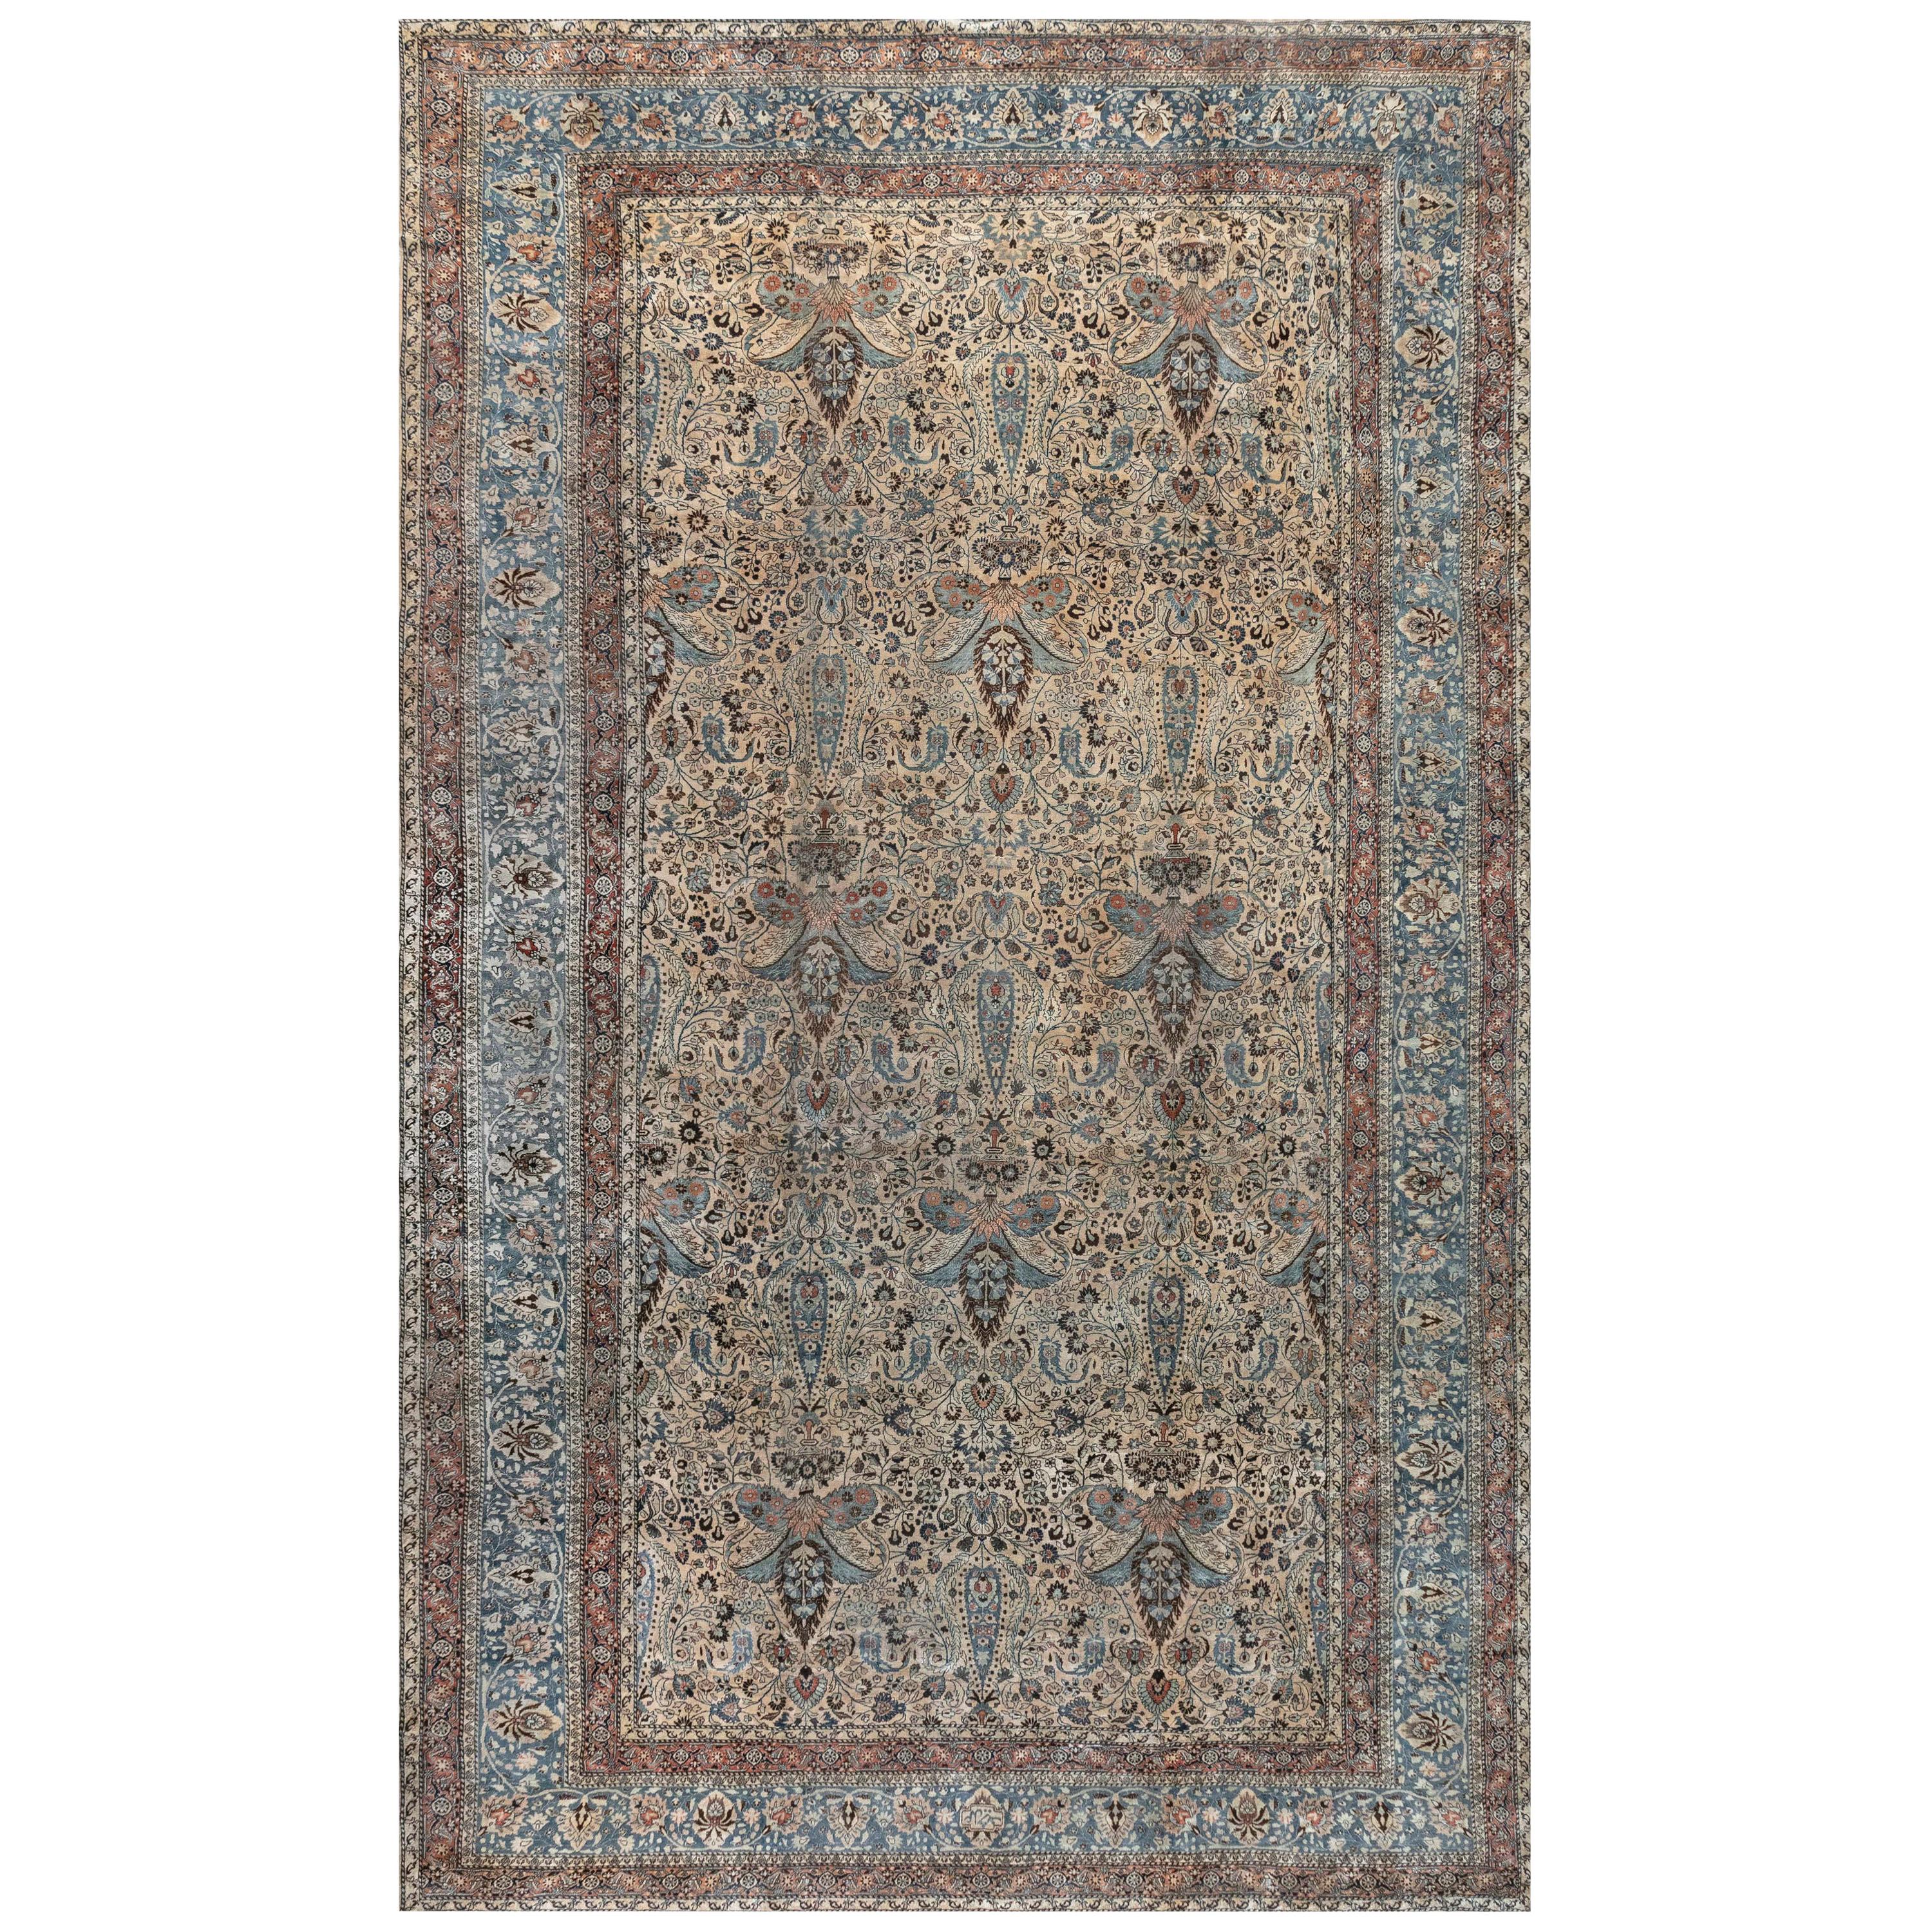 Authentic 1900s Persian Khorassan Rug